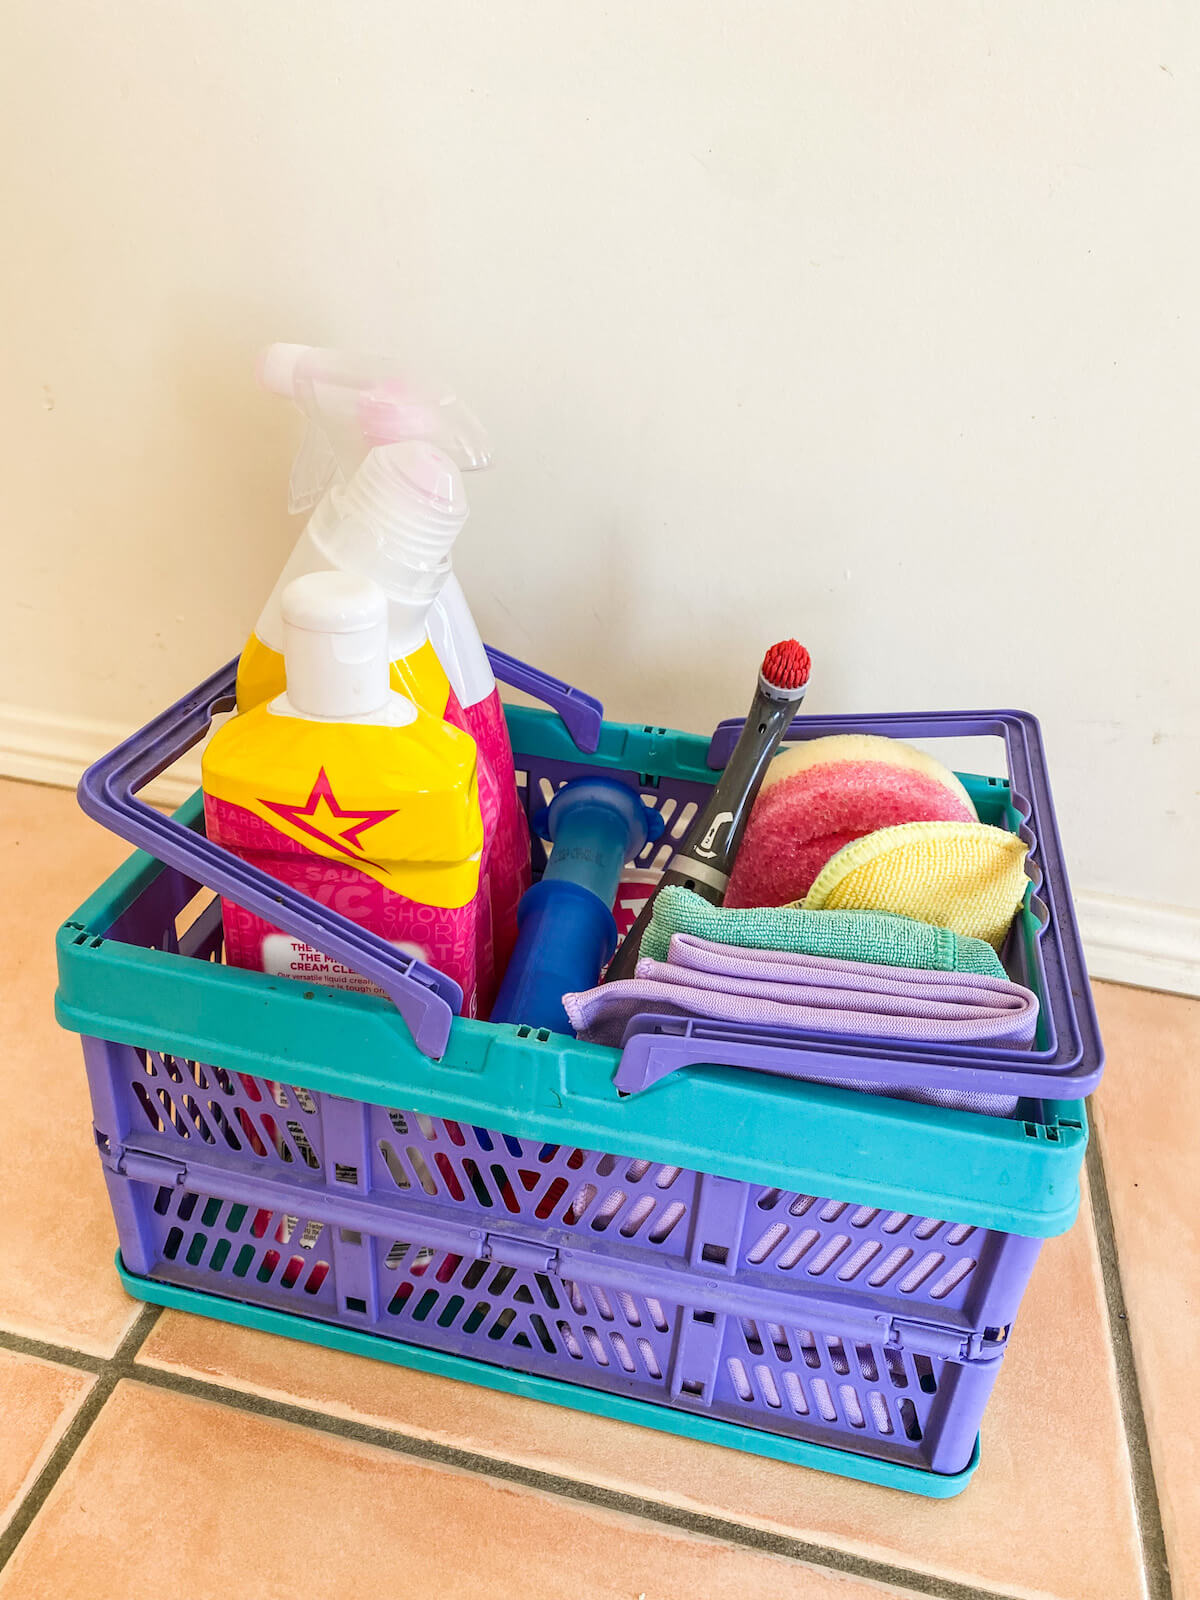 Home cleaning caddy full of cleaning supplies